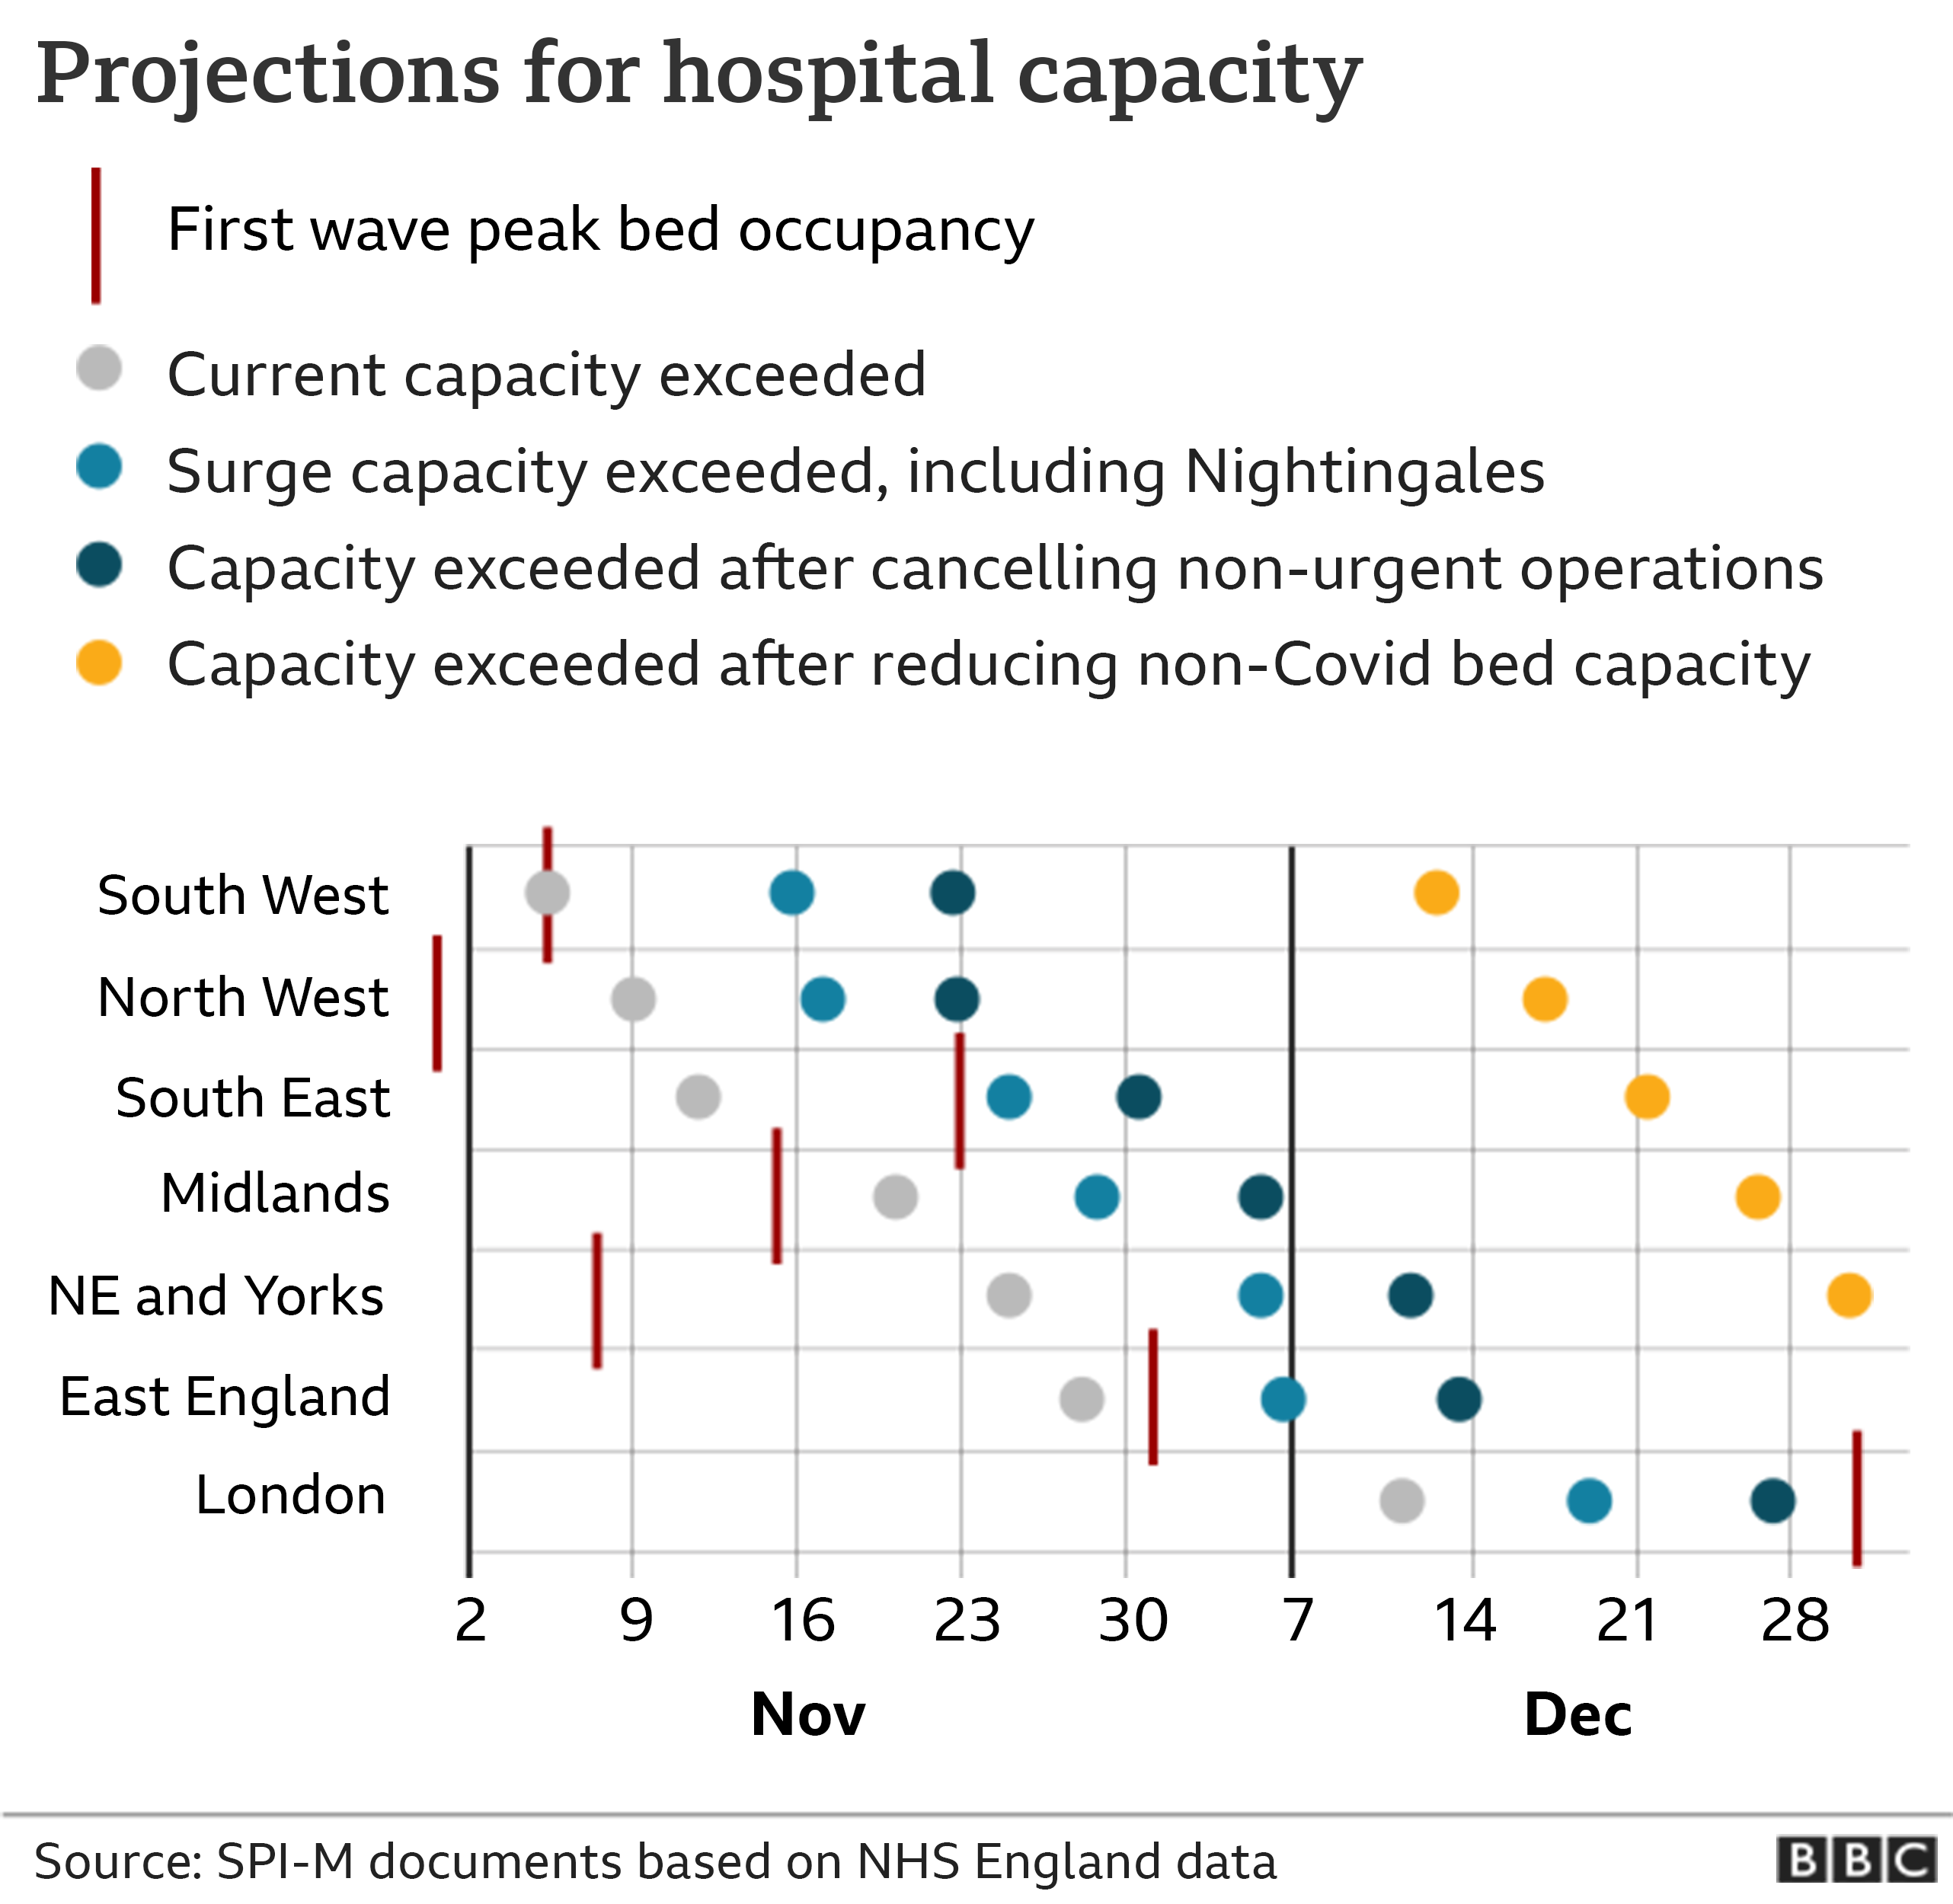 Graphic showing projections for hospital capacity